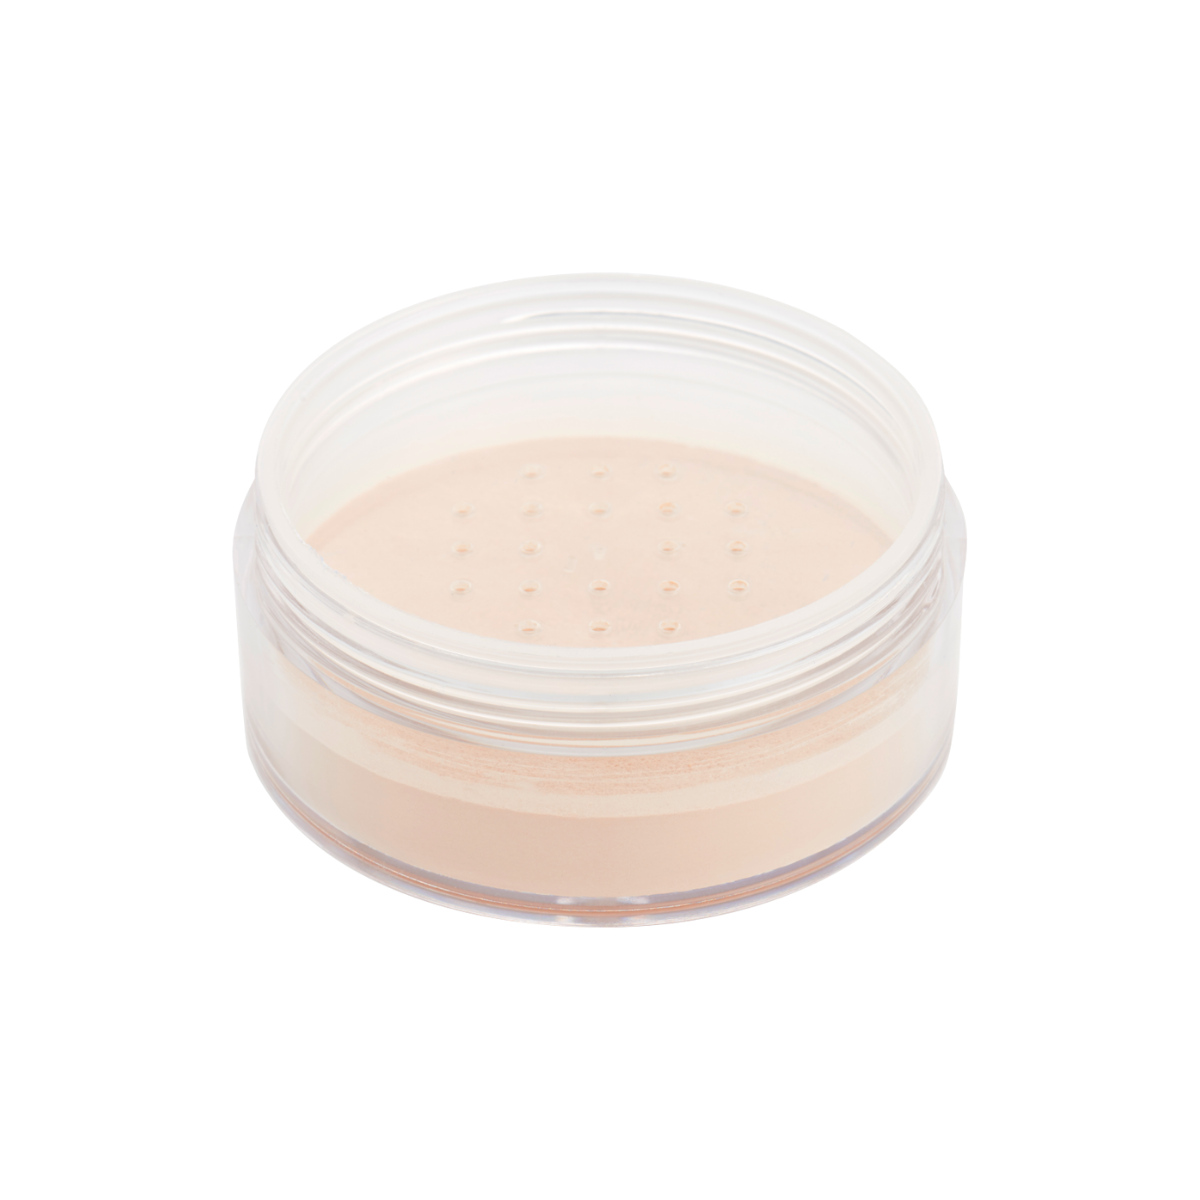 Lasting Perfection Sheer Loose Powder - Translucent – Collection Cosmetics